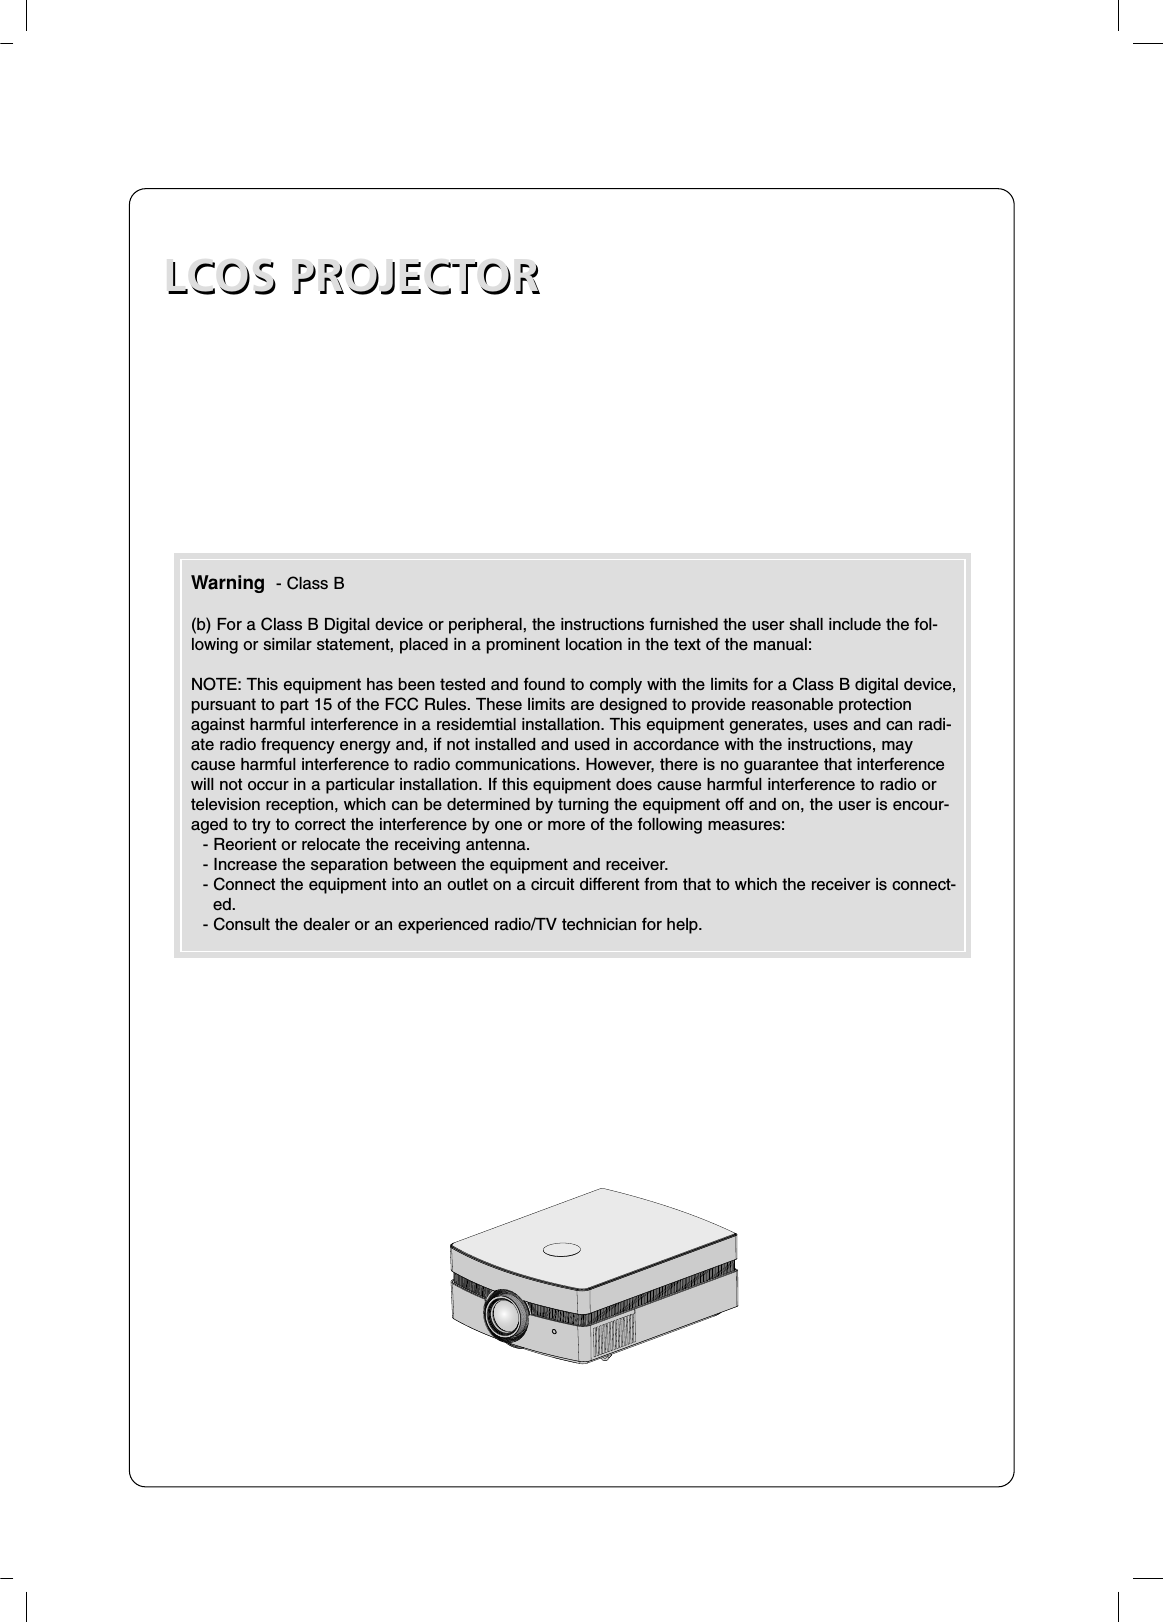 LCOS PROJECTORLCOS PROJECTORWarning  - Class B(b) For a Class B Digital device or peripheral, the instructions furnished the user shall include the fol-lowing or similar statement, placed in a prominent location in the text of the manual:NOTE: This equipment has been tested and found to comply with the limits for a Class B digital device,pursuant to part 15 of the FCC Rules. These limits are designed to provide reasonable protectionagainst harmful interference in a residemtial installation. This equipment generates, uses and can radi-ate radio frequency energy and, if not installed and used in accordance with the instructions, maycause harmful interference to radio communications. However, there is no guarantee that interferencewill not occur in a particular installation. If this equipment does cause harmful interference to radio ortelevision reception, which can be determined by turning the equipment off and on, the user is encour-aged to try to correct the interference by one or more of the following measures:- Reorient or relocate the receiving antenna.- Increase the separation between the equipment and receiver.- Connect the equipment into an outlet on a circuit different from that to which the receiver is connect-ed.- Consult the dealer or an experienced radio/TV technician for help.